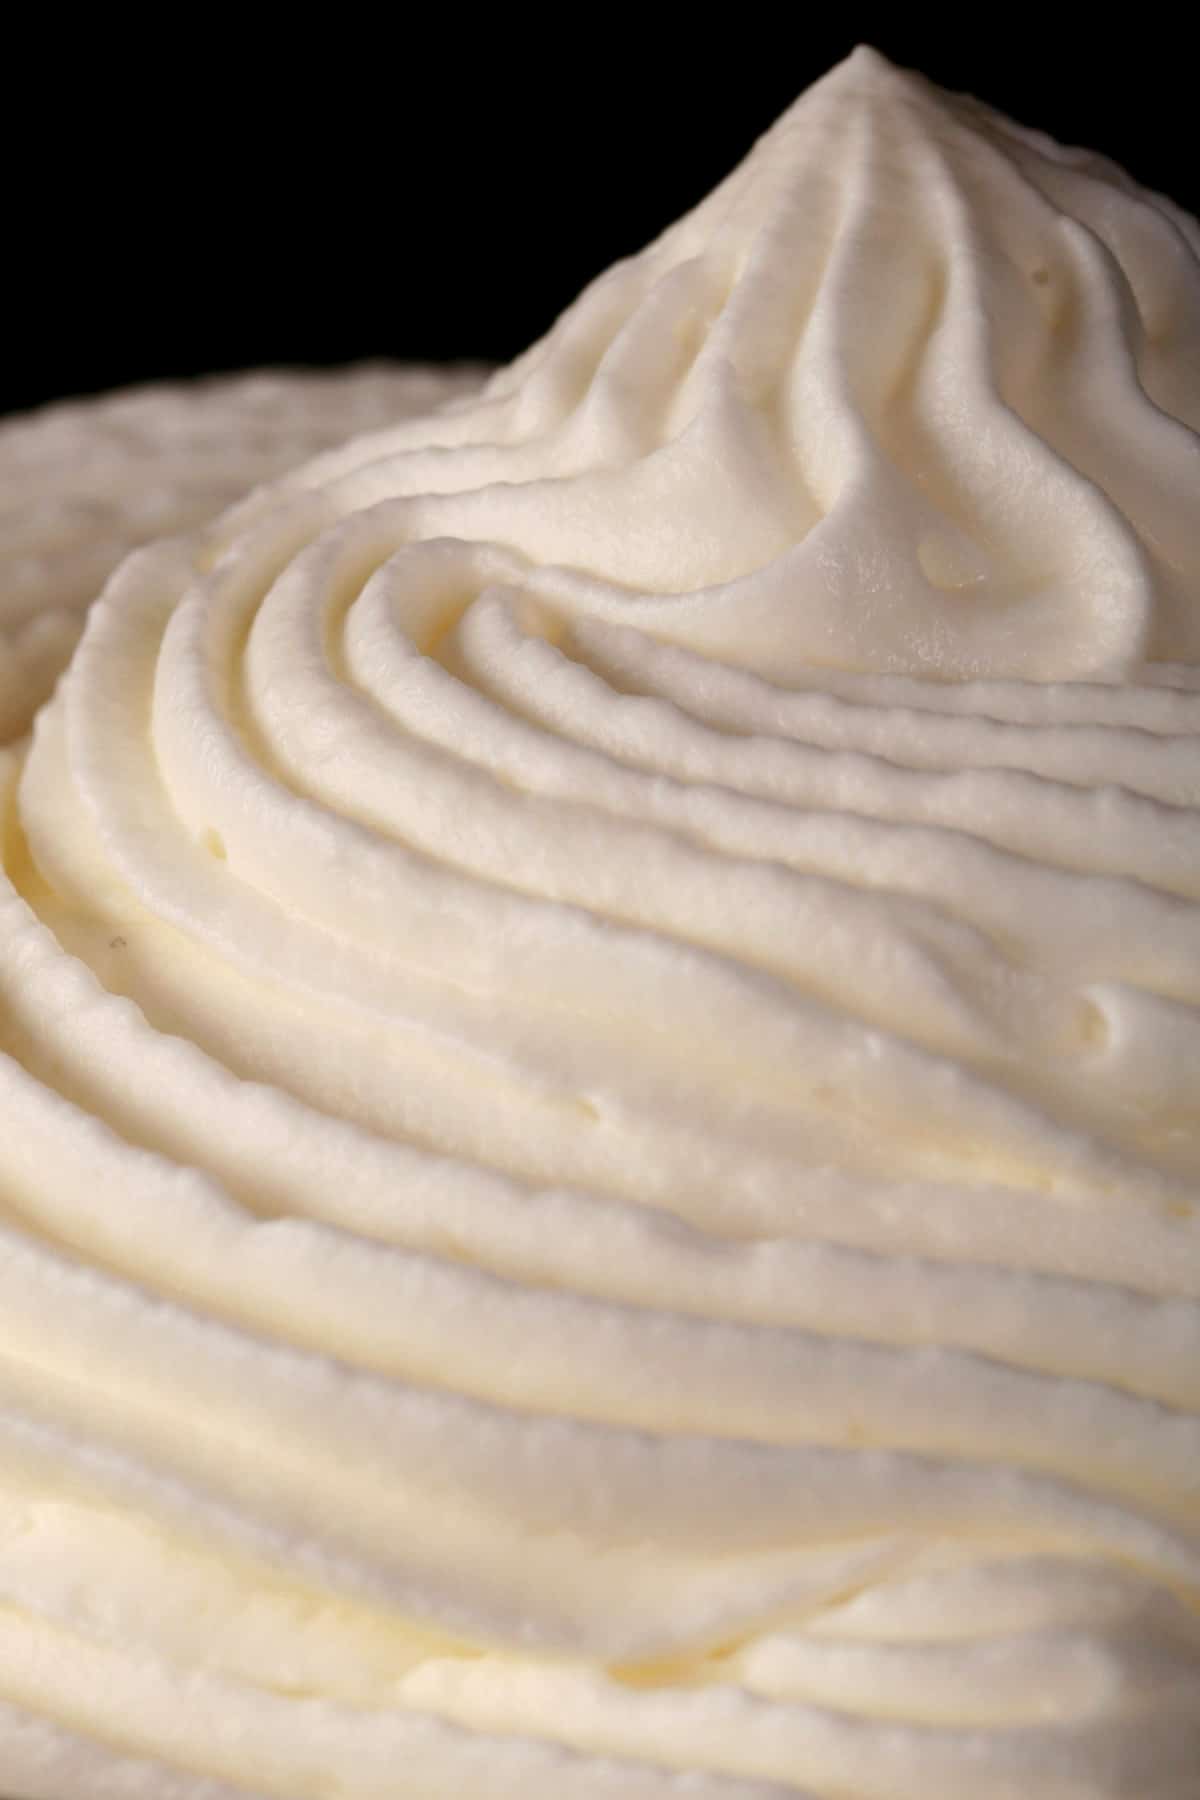 A bowl of piped stabilized whipped cream.